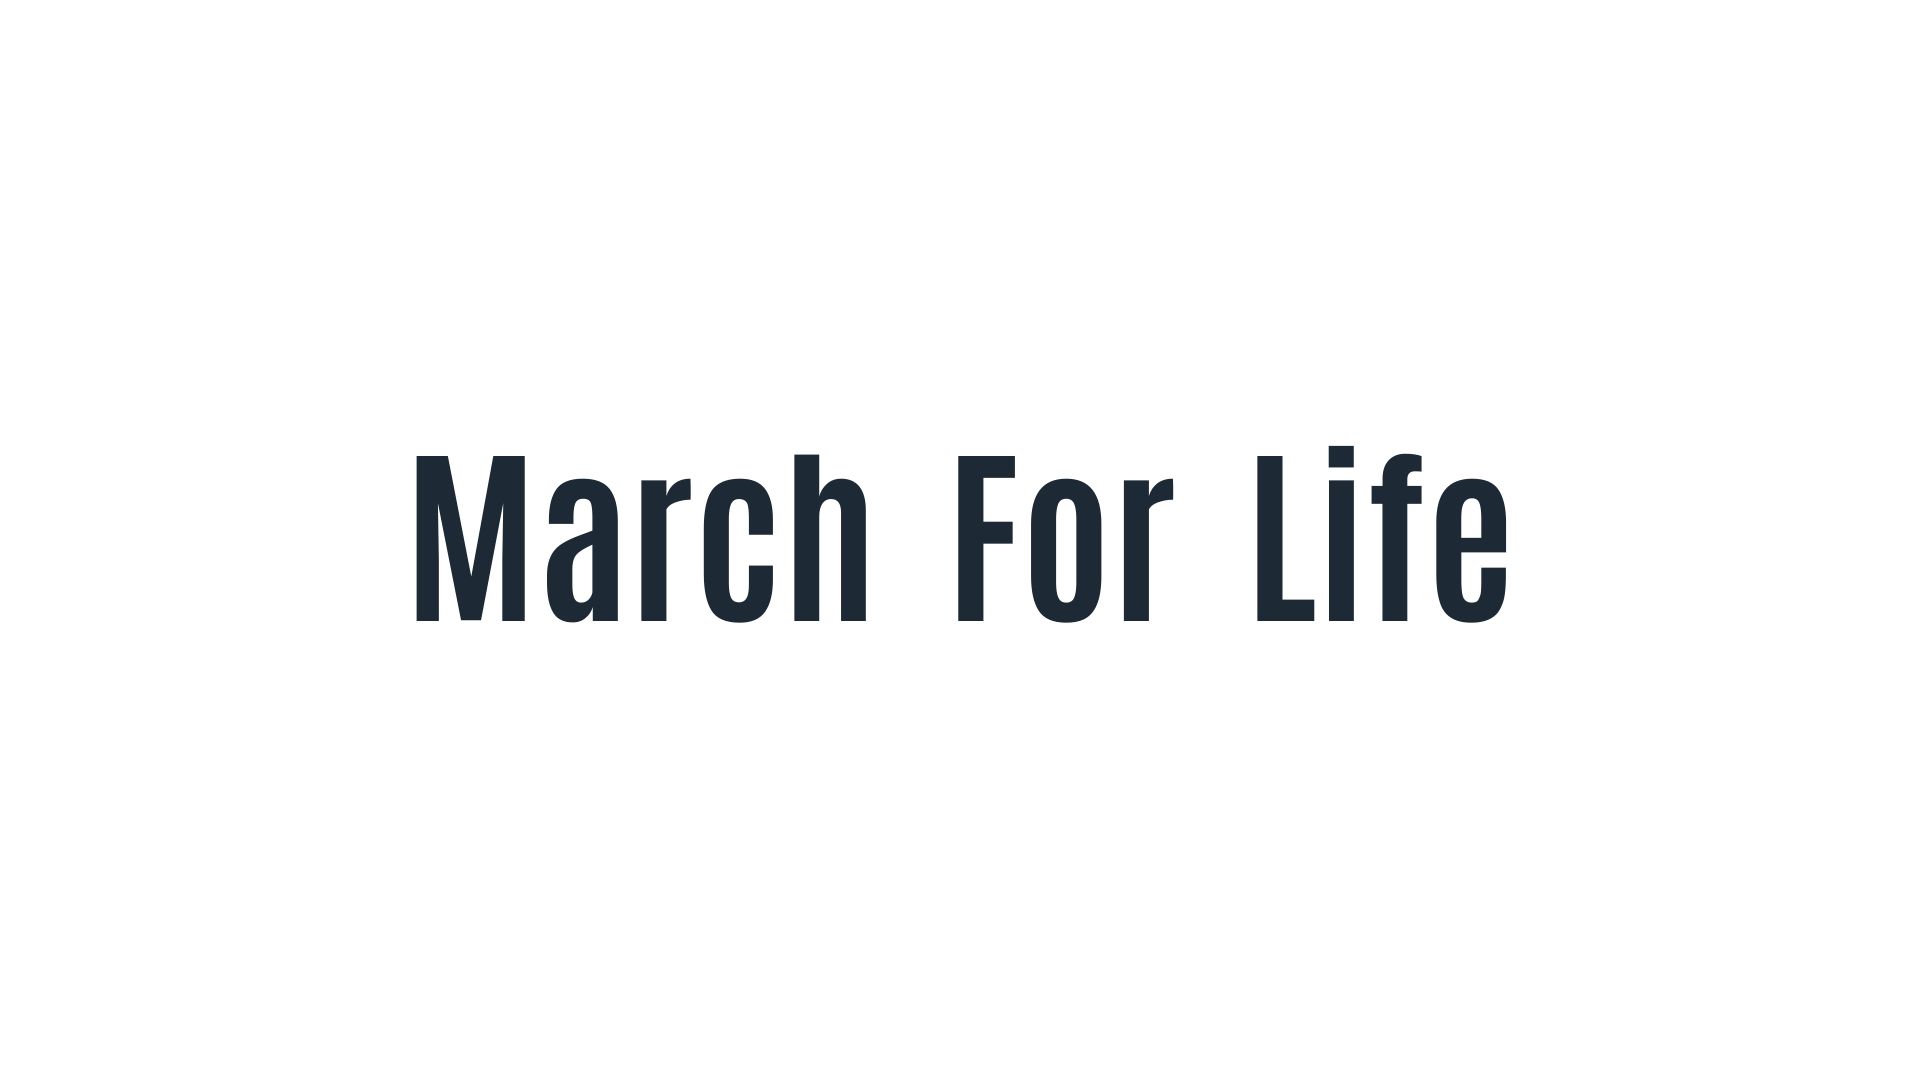 March for life.png